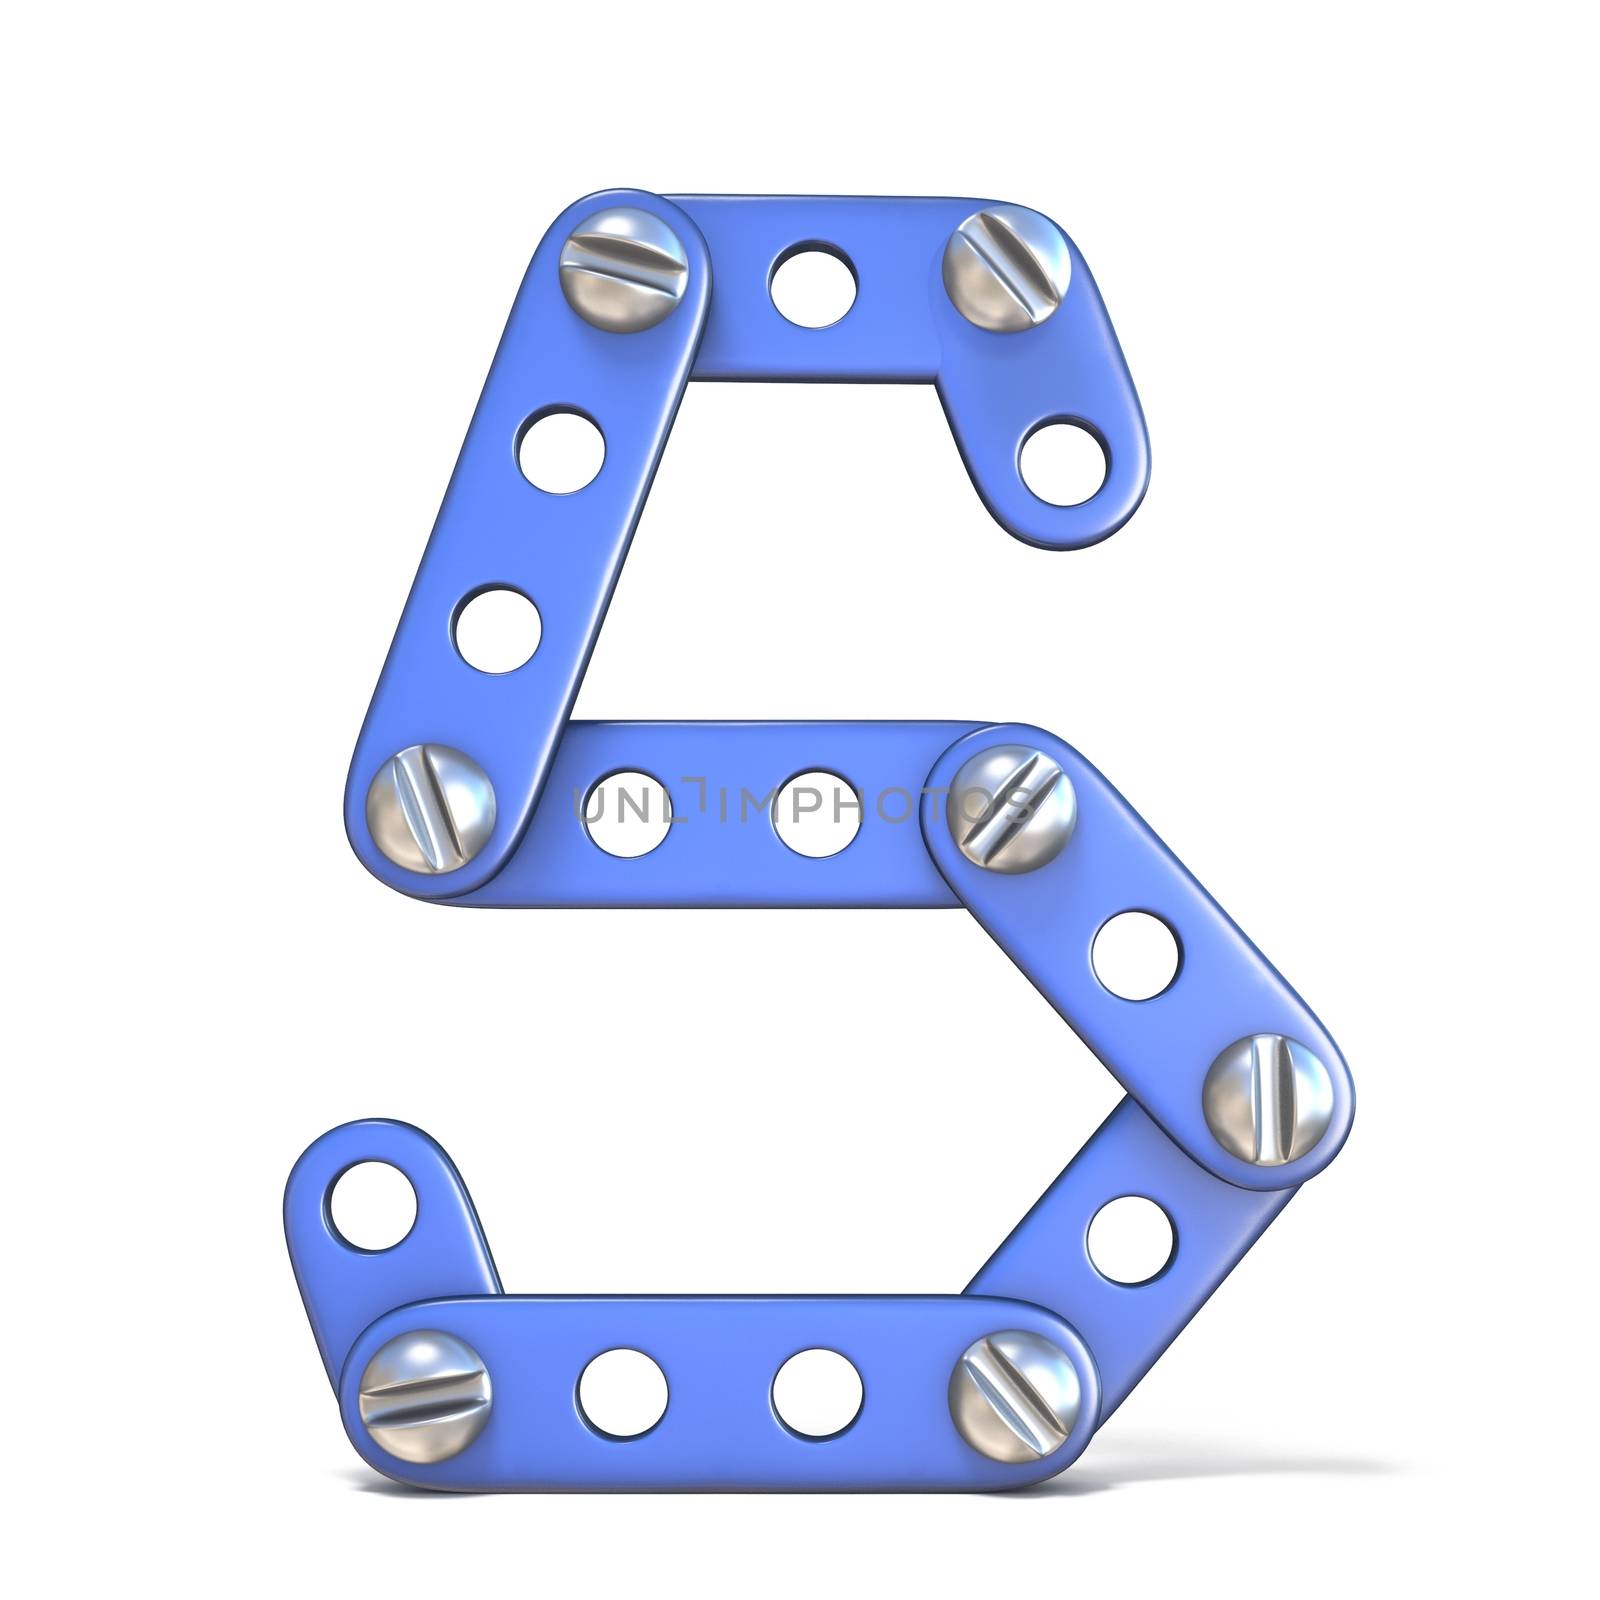 Alphabet made of blue metal constructor toy Letter S 3D by djmilic